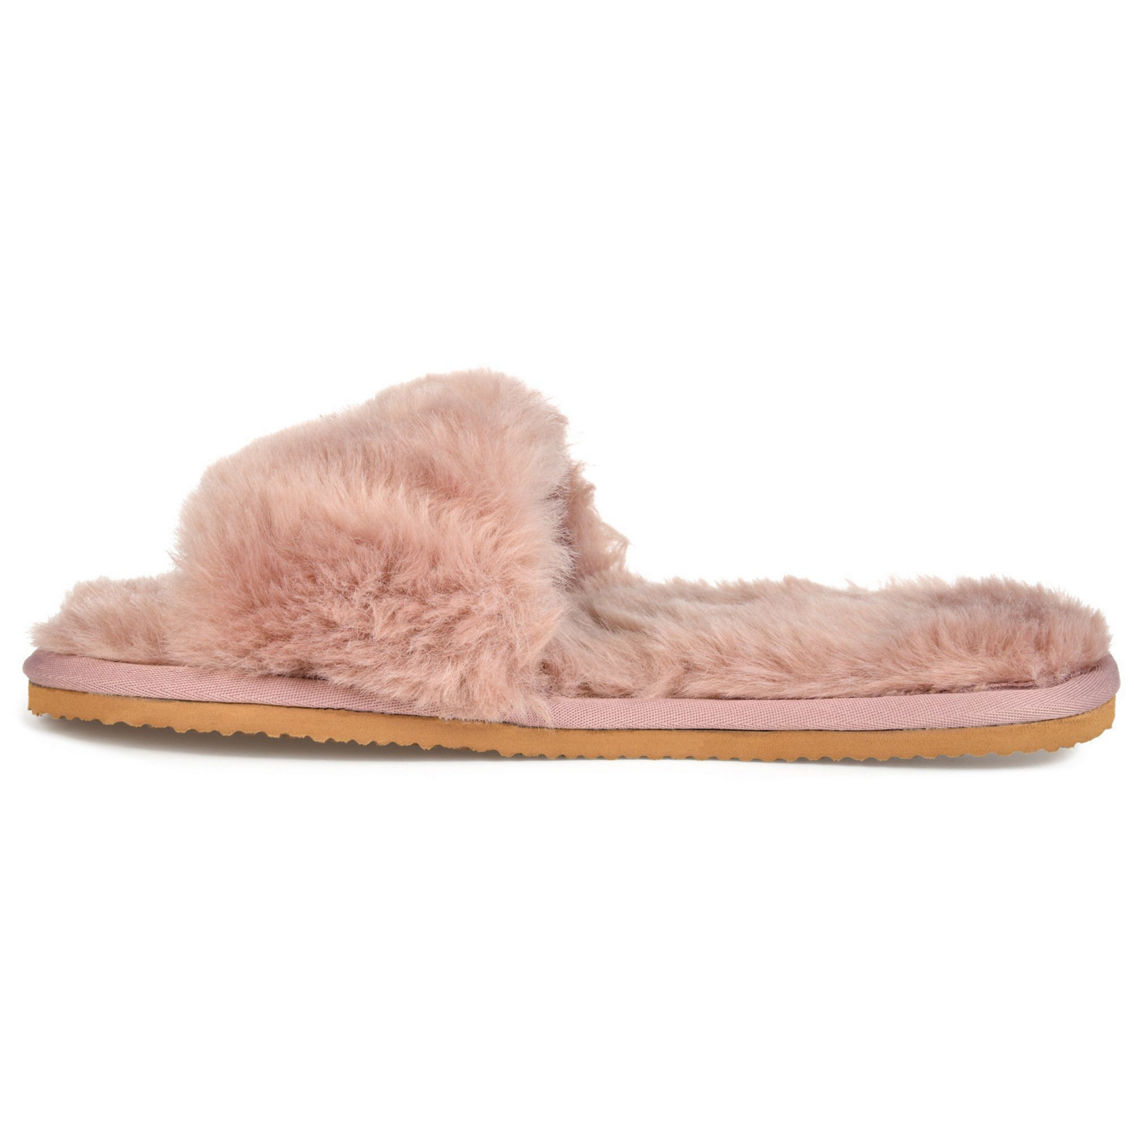 Journee Collection Women's Dawn Slipper - Image 4 of 5